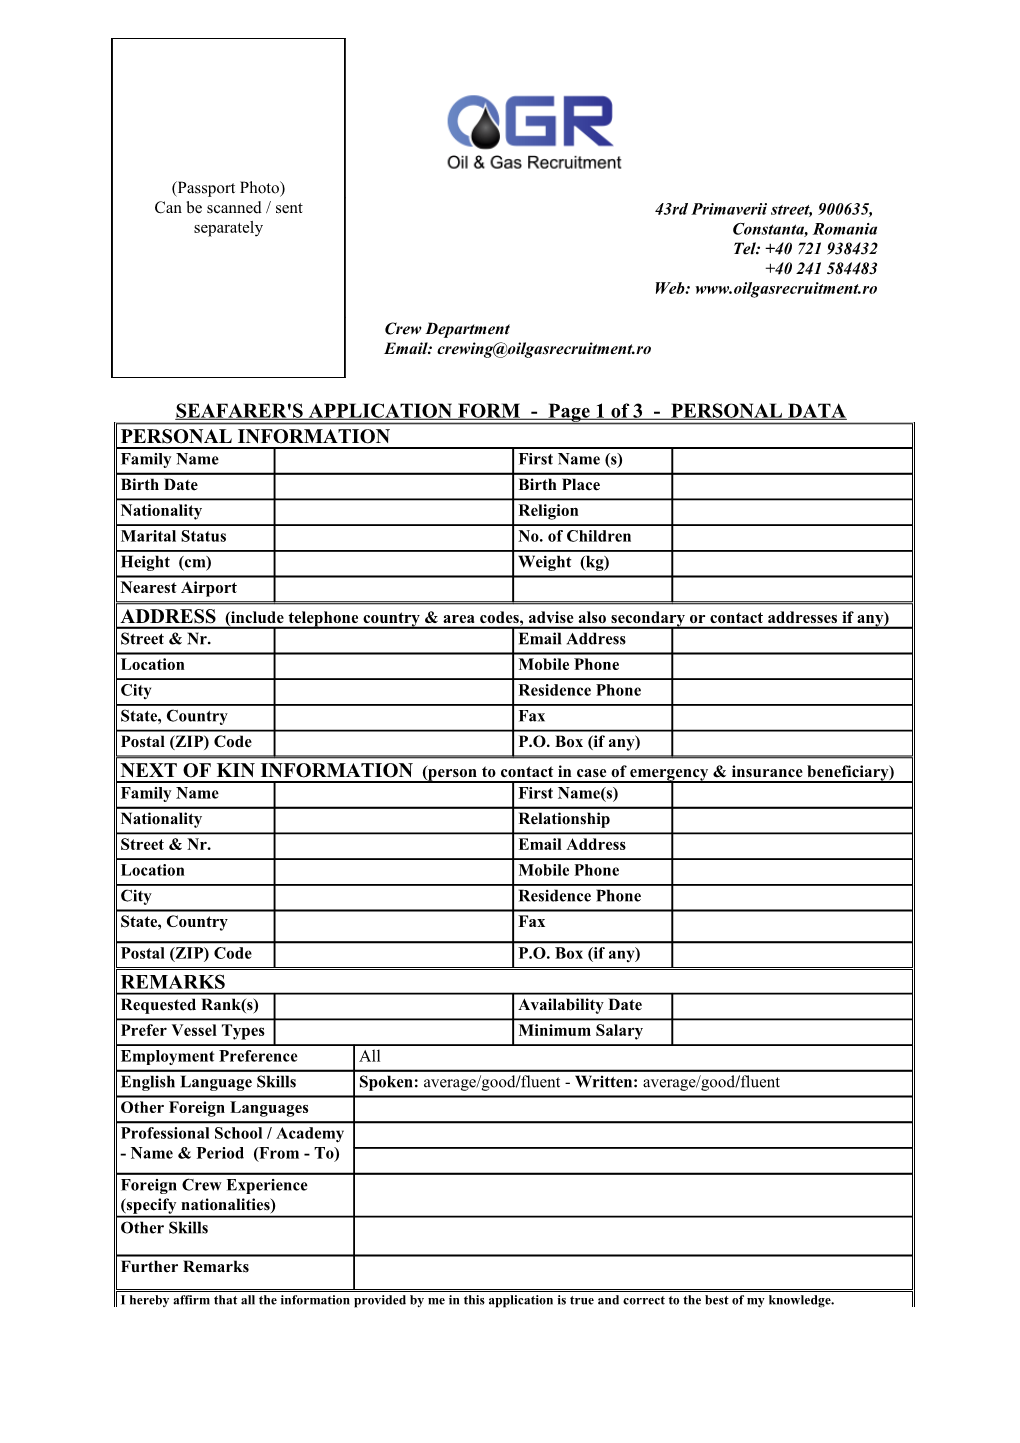 SEAFARER's APPLICATION FORM - Page 1 of 3 - PERSONAL DATA